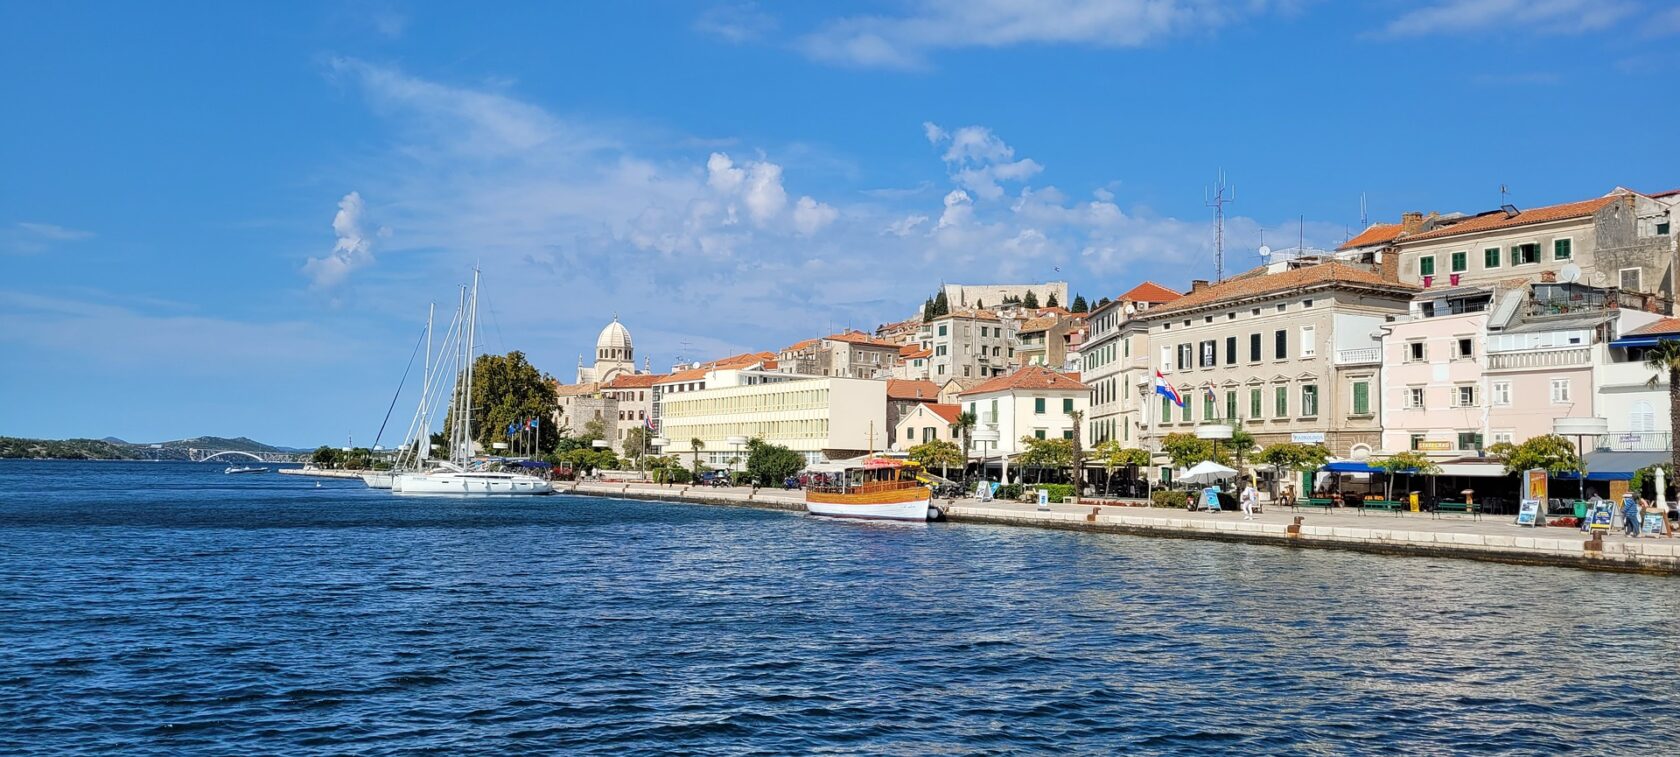 A view of the city of Sibenik from the water (an Atlantis site).